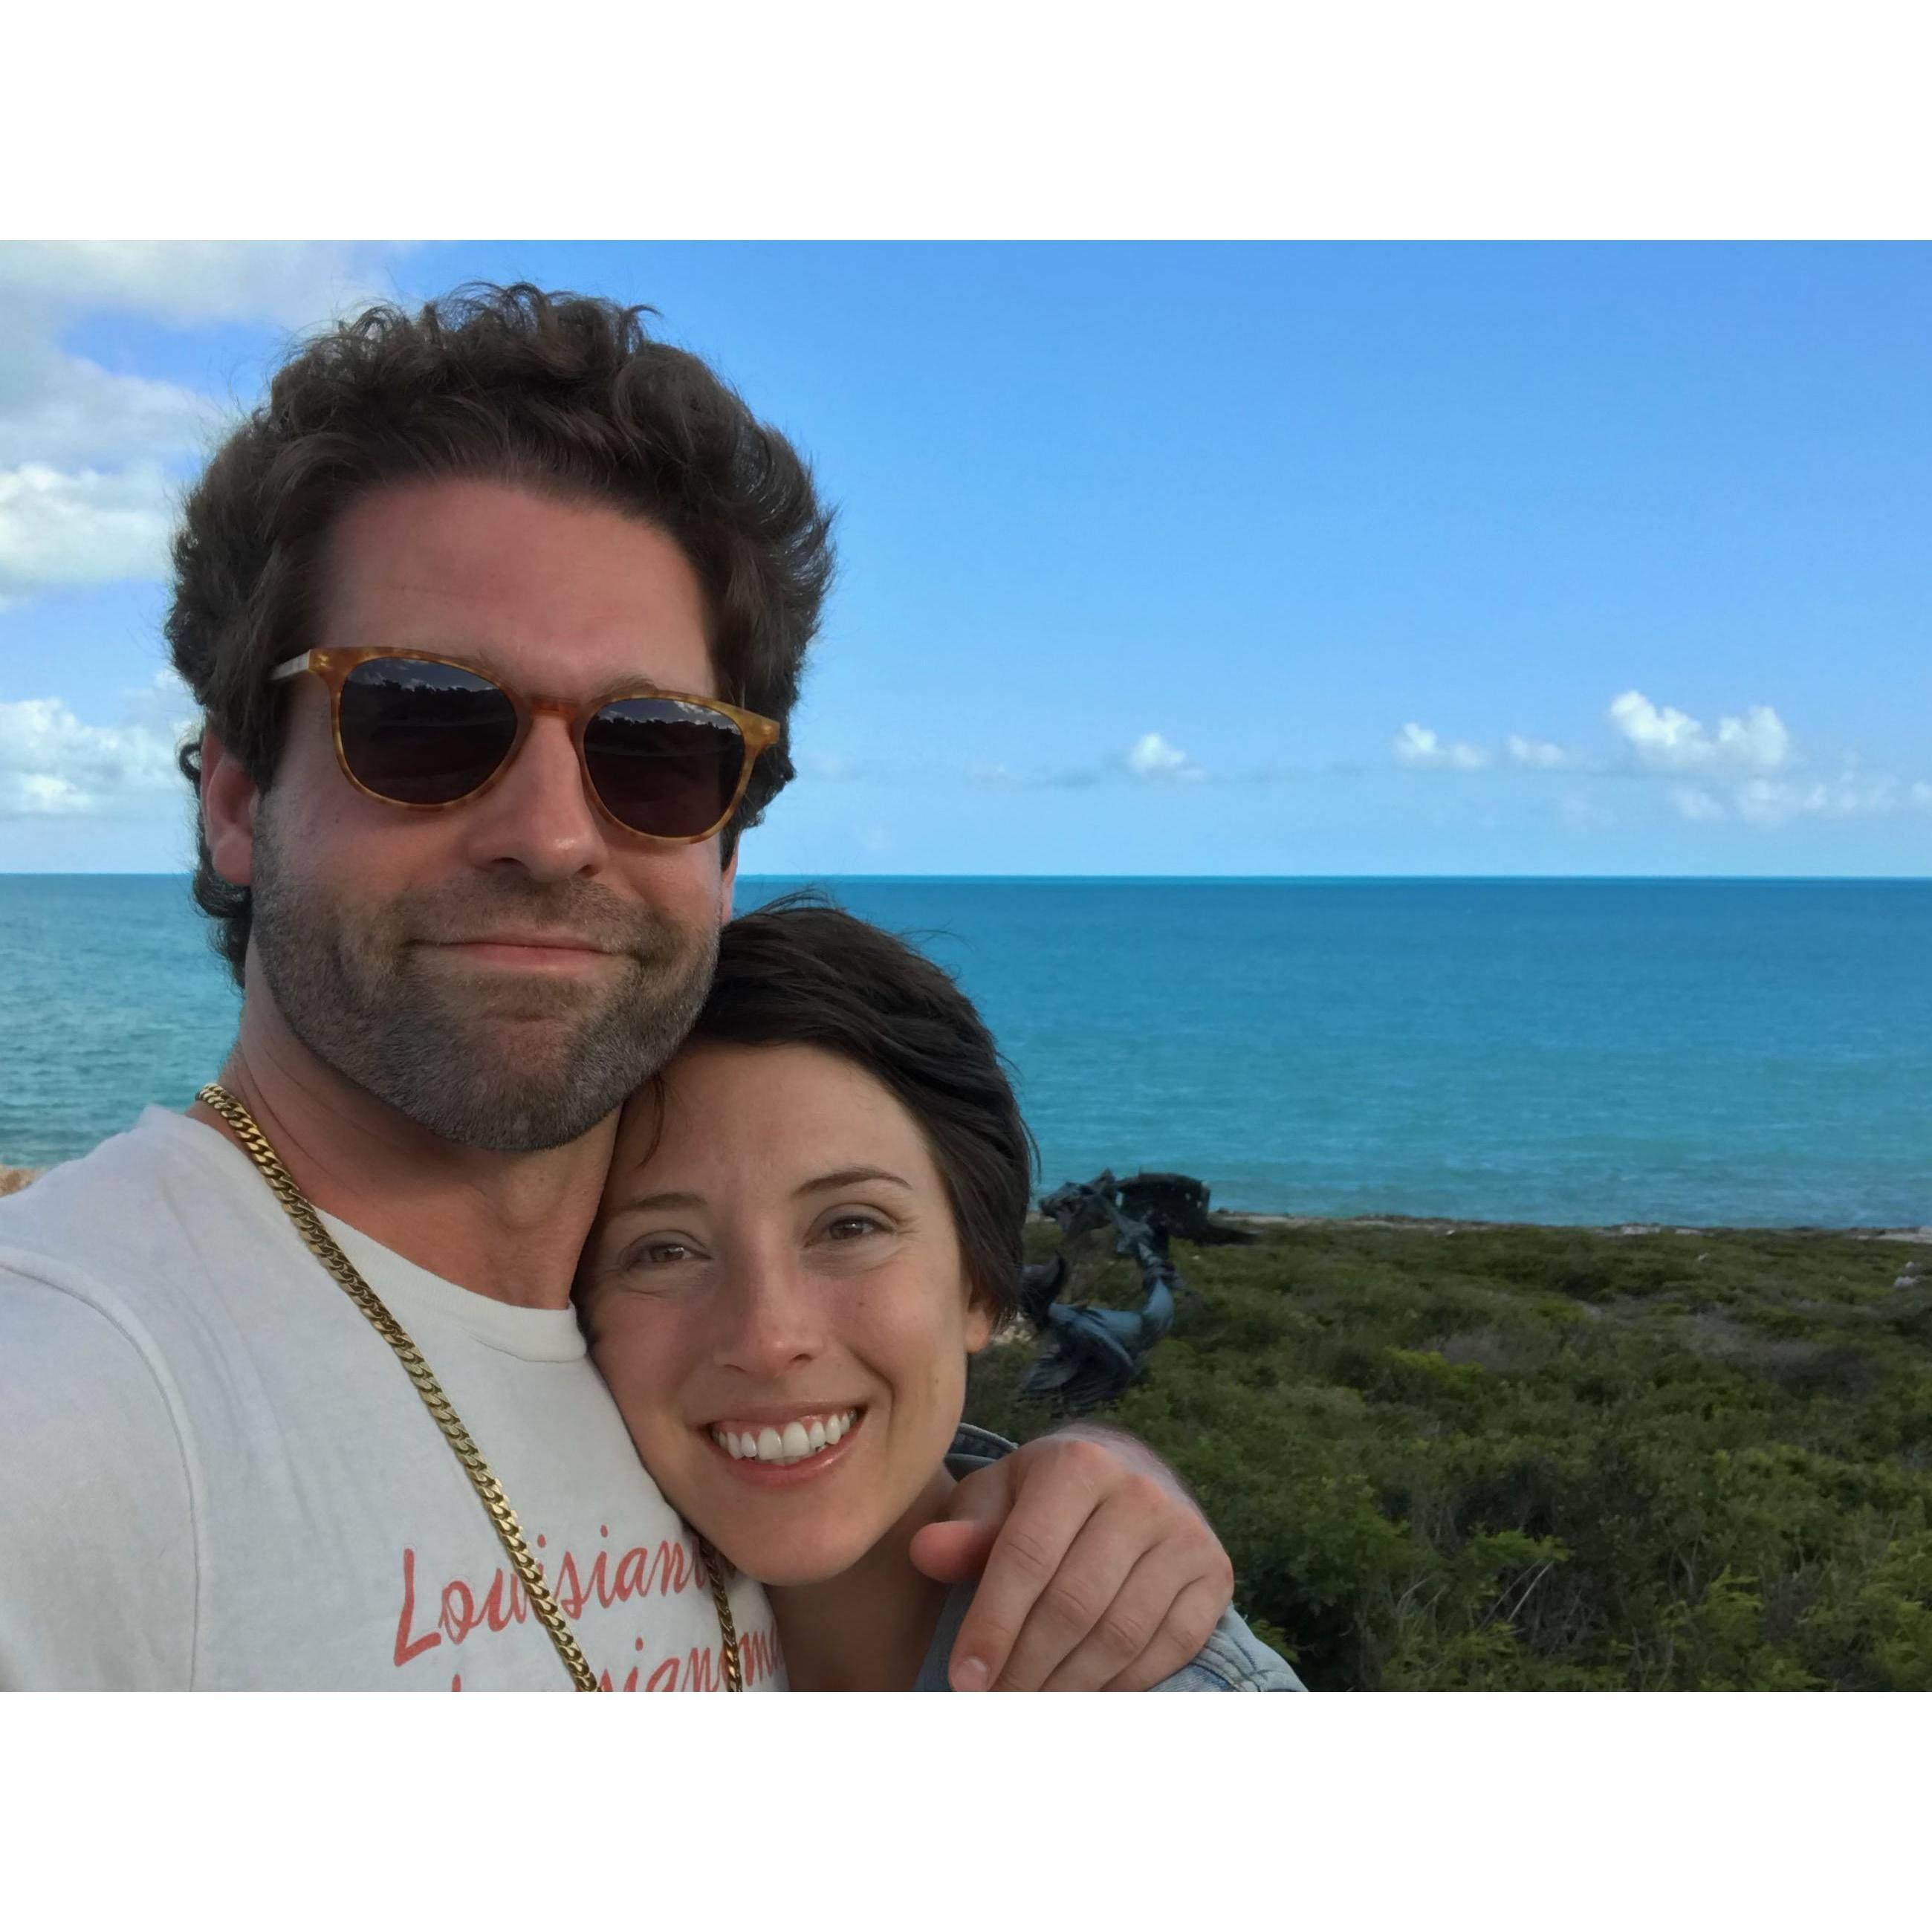 Turks & Caicos, February 2018- post MG, caribbean beach trip catching sunsets and eating coconut cracked conch